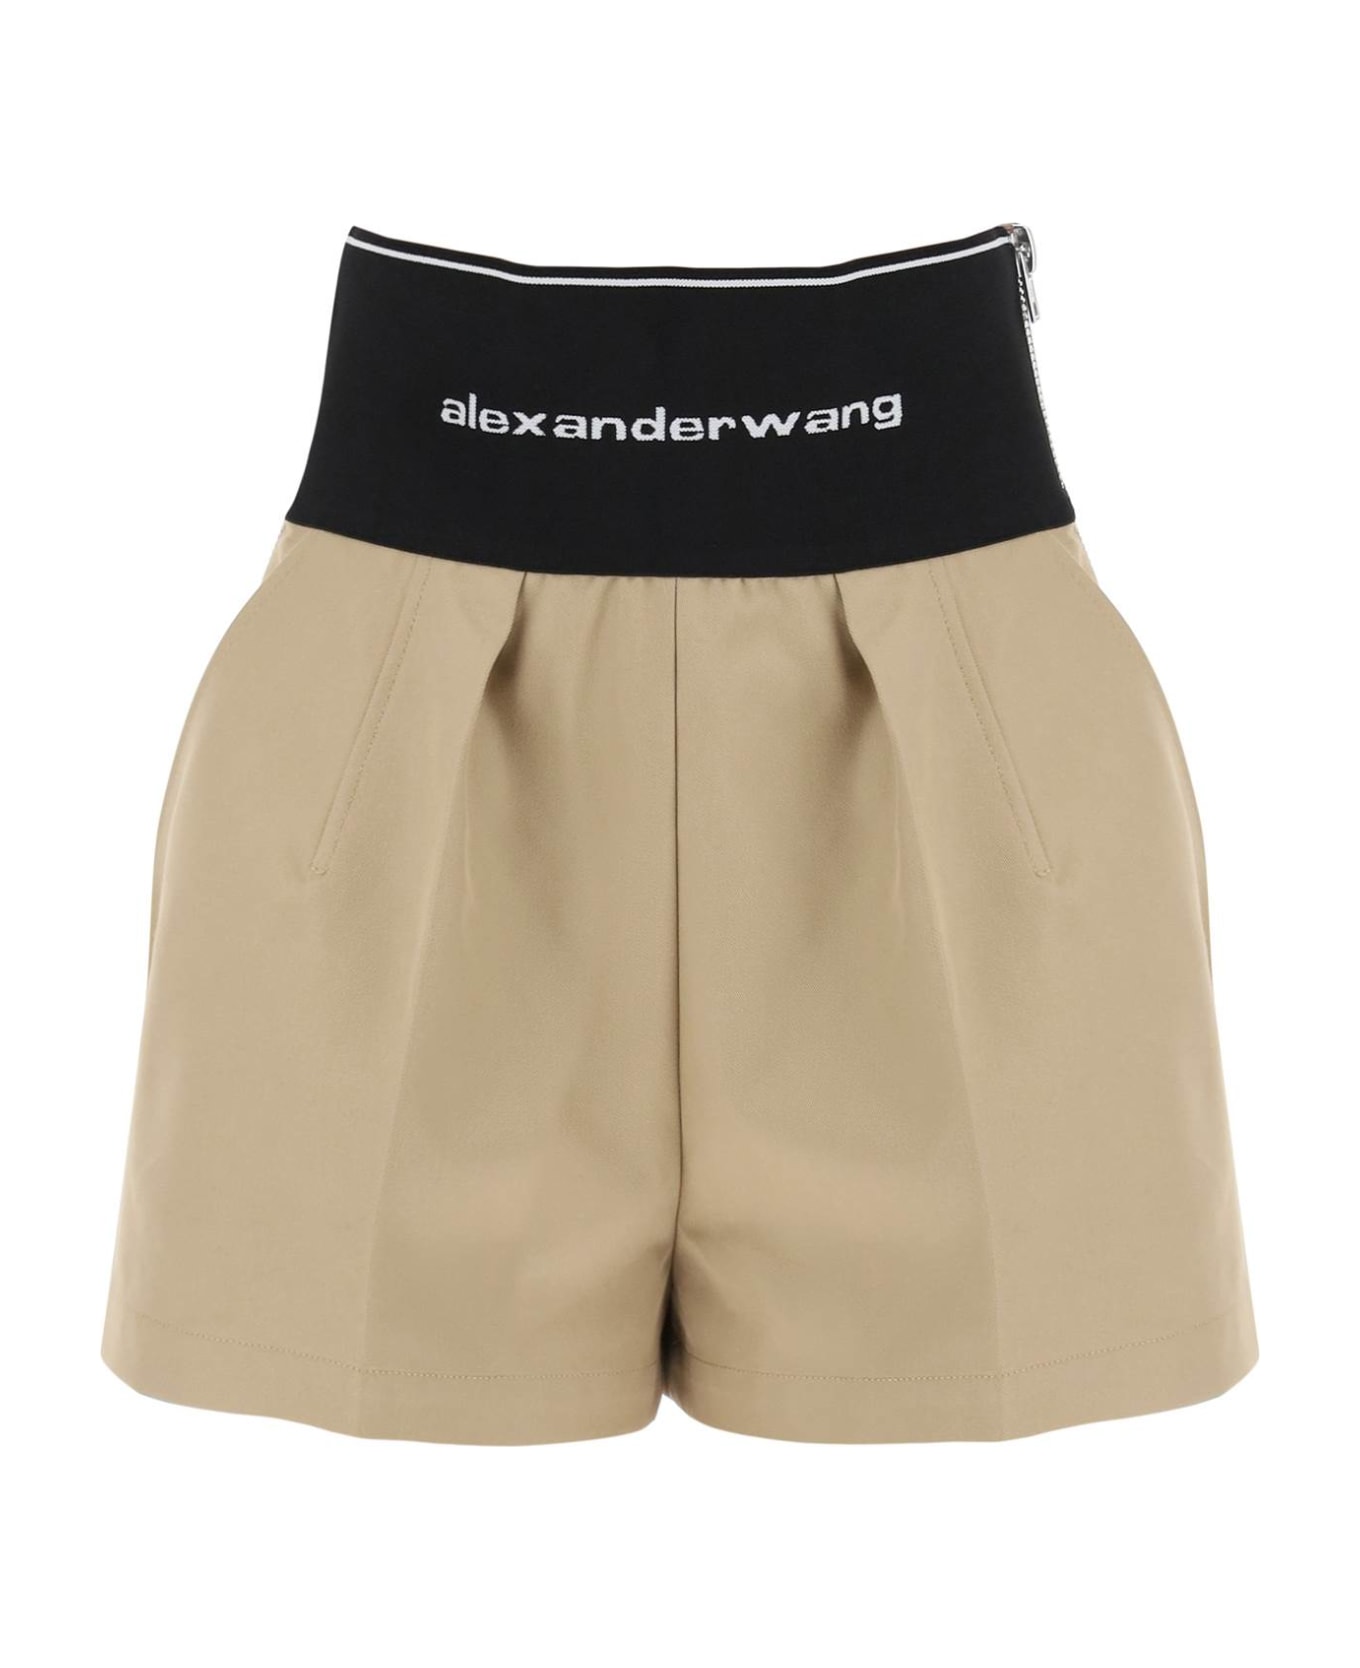 Alexander Wang Cotton And Nylon Shorts With Branded Waistband - CHINO (Beige)